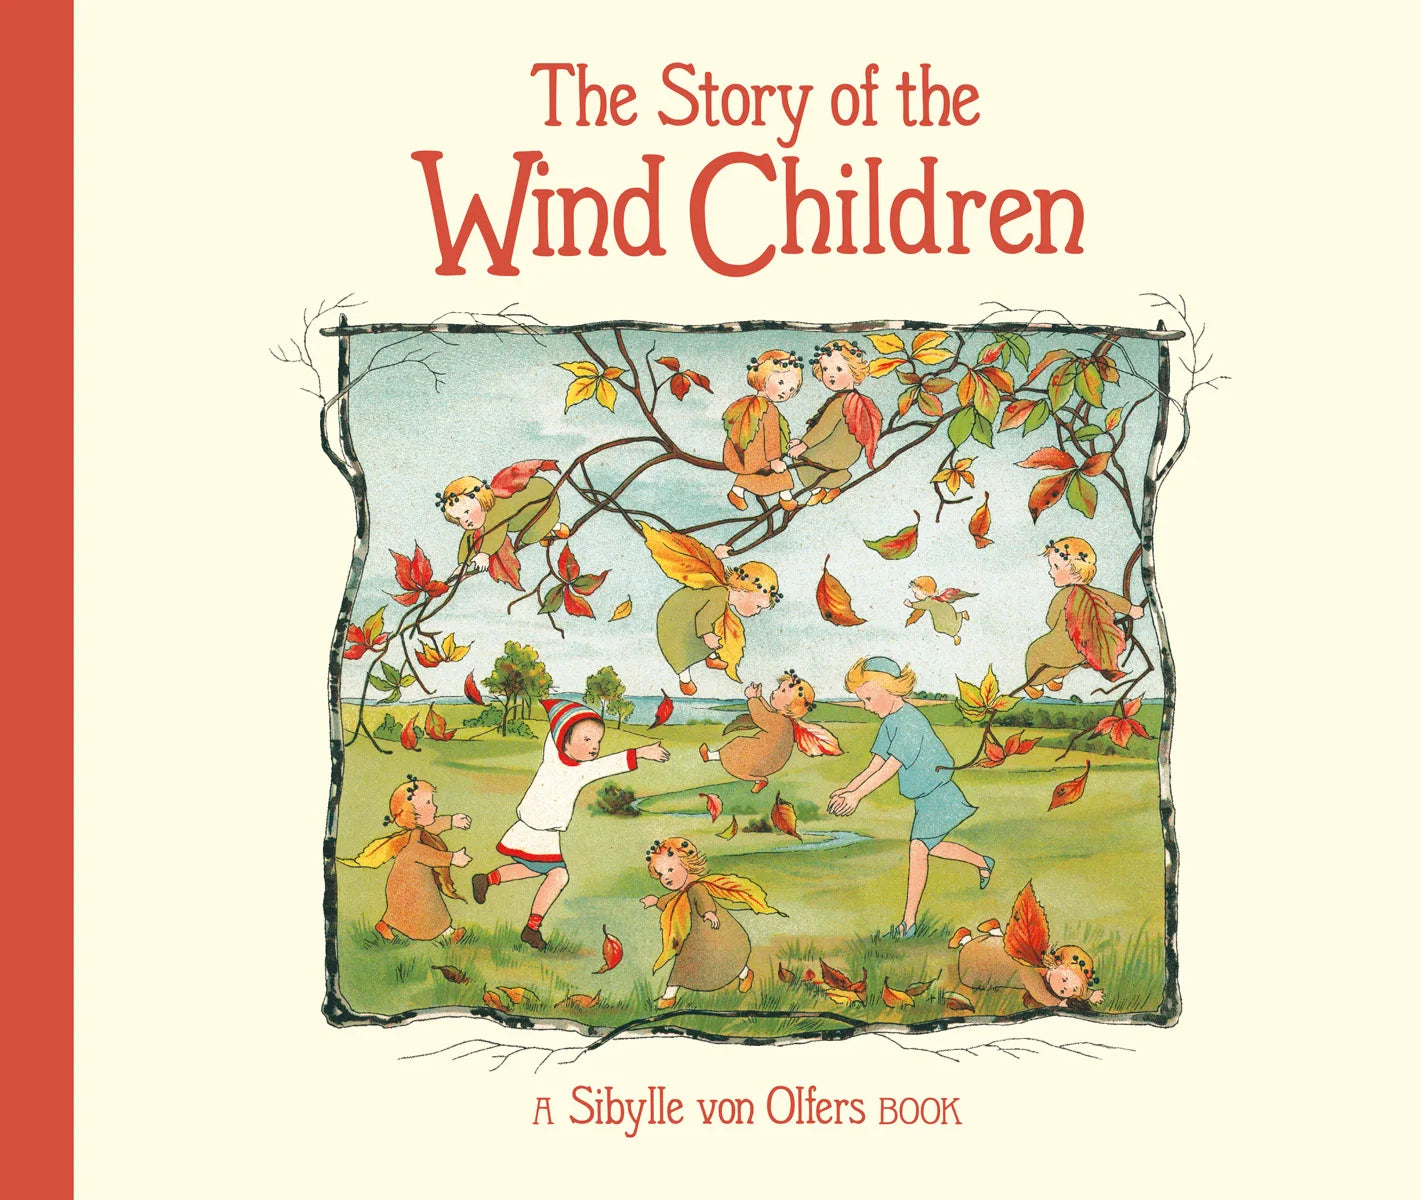 The Story of the Wind Children by Sibylle von Olfers